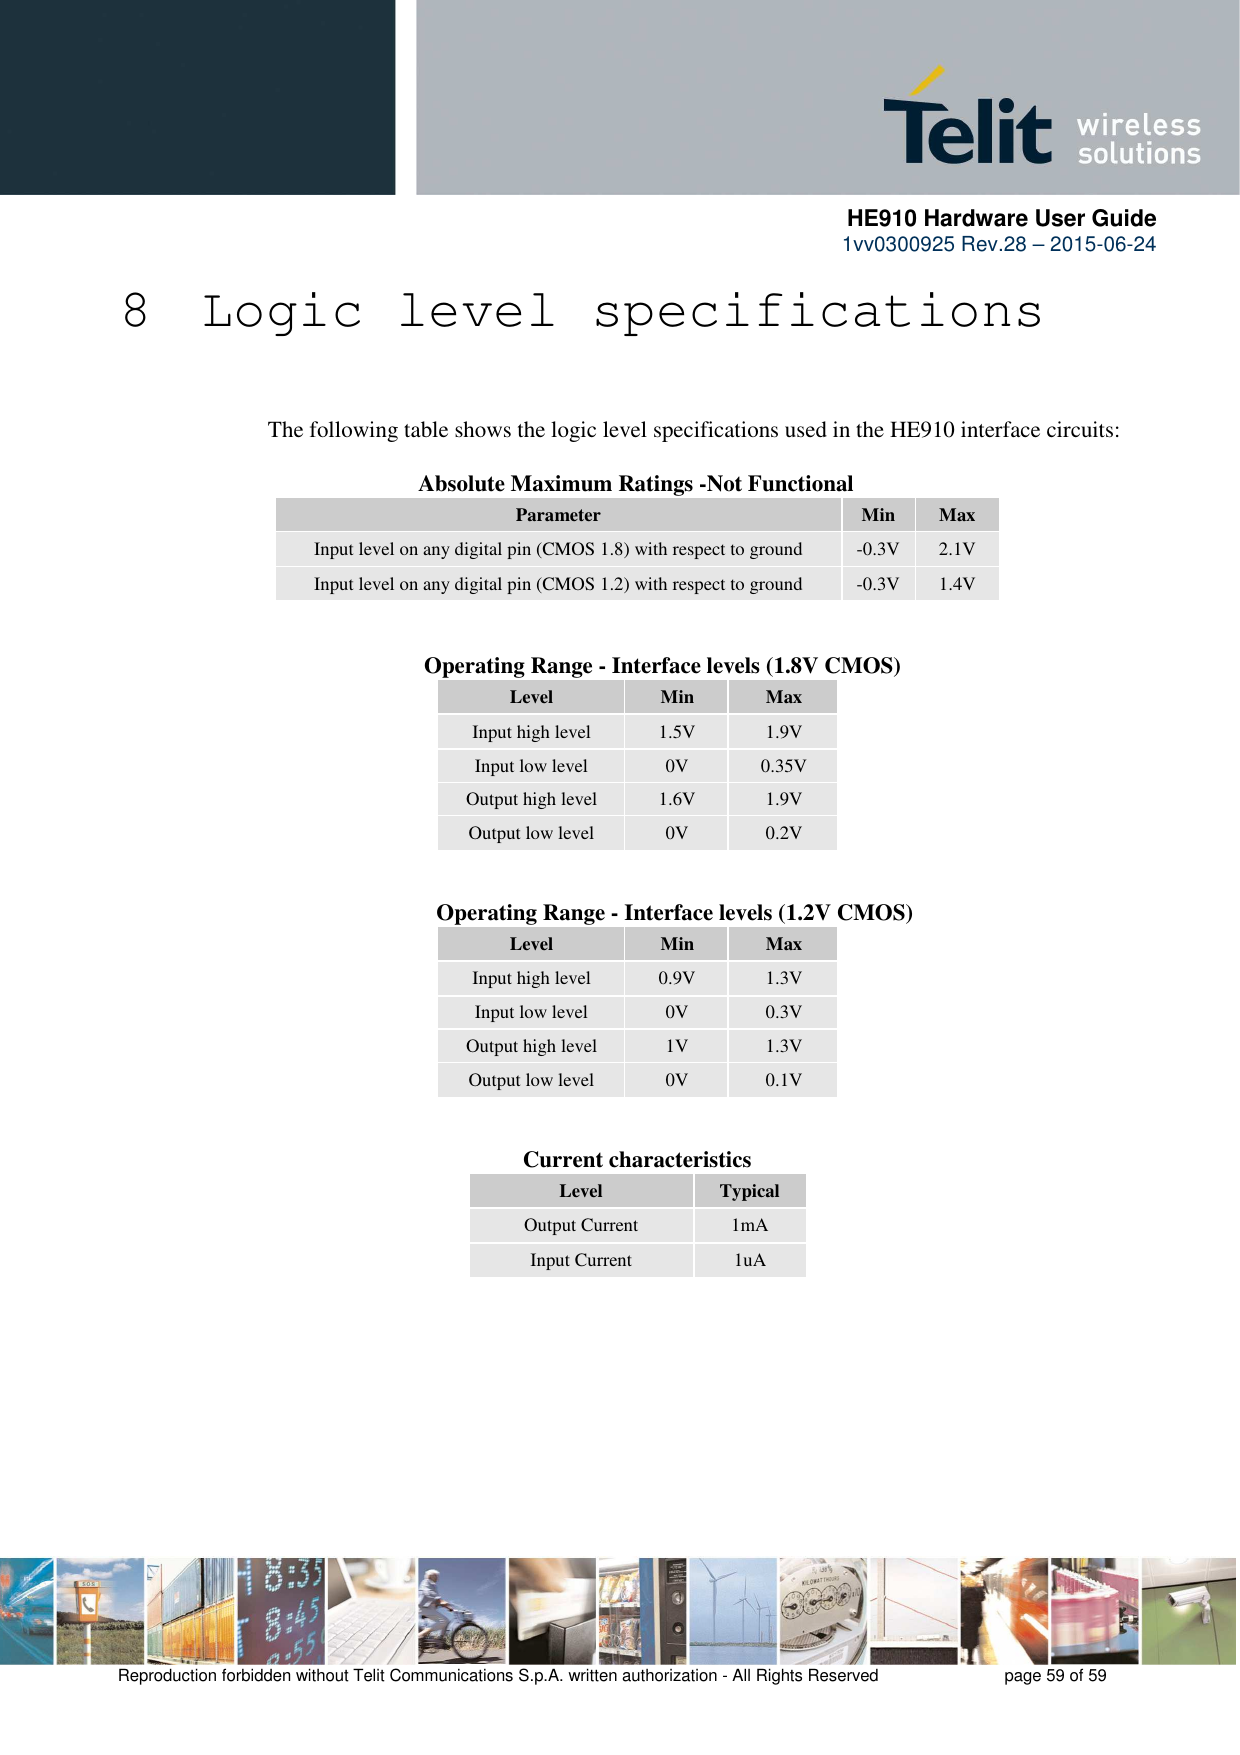      HE910 Hardware User Guide 1vv0300925 Rev.28 – 2015-06-24    Reproduction forbidden without Telit Communications S.p.A. written authorization - All Rights Reserved    page 59 of 59  8 Logic level specifications  The following table shows the logic level specifications used in the HE910 interface circuits:            Absolute Maximum Ratings -Not Functional Parameter  Min  Max Input level on any digital pin (CMOS 1.8) with respect to ground  -0.3V  2.1V Input level on any digital pin (CMOS 1.2) with respect to ground  -0.3V  1.4V               Operating Range - Interface levels (1.8V CMOS) Level  Min  Max Input high level  1.5V  1.9V Input low level  0V  0.35V Output high level  1.6V  1.9V Output low level  0V  0.2V   Operating Range - Interface levels (1.2V CMOS) Level  Min  Max Input high level  0.9V  1.3V Input low level  0V  0.3V Output high level  1V  1.3V Output low level  0V  0.1V   Current characteristics Level  Typical Output Current  1mA Input Current  1uA 